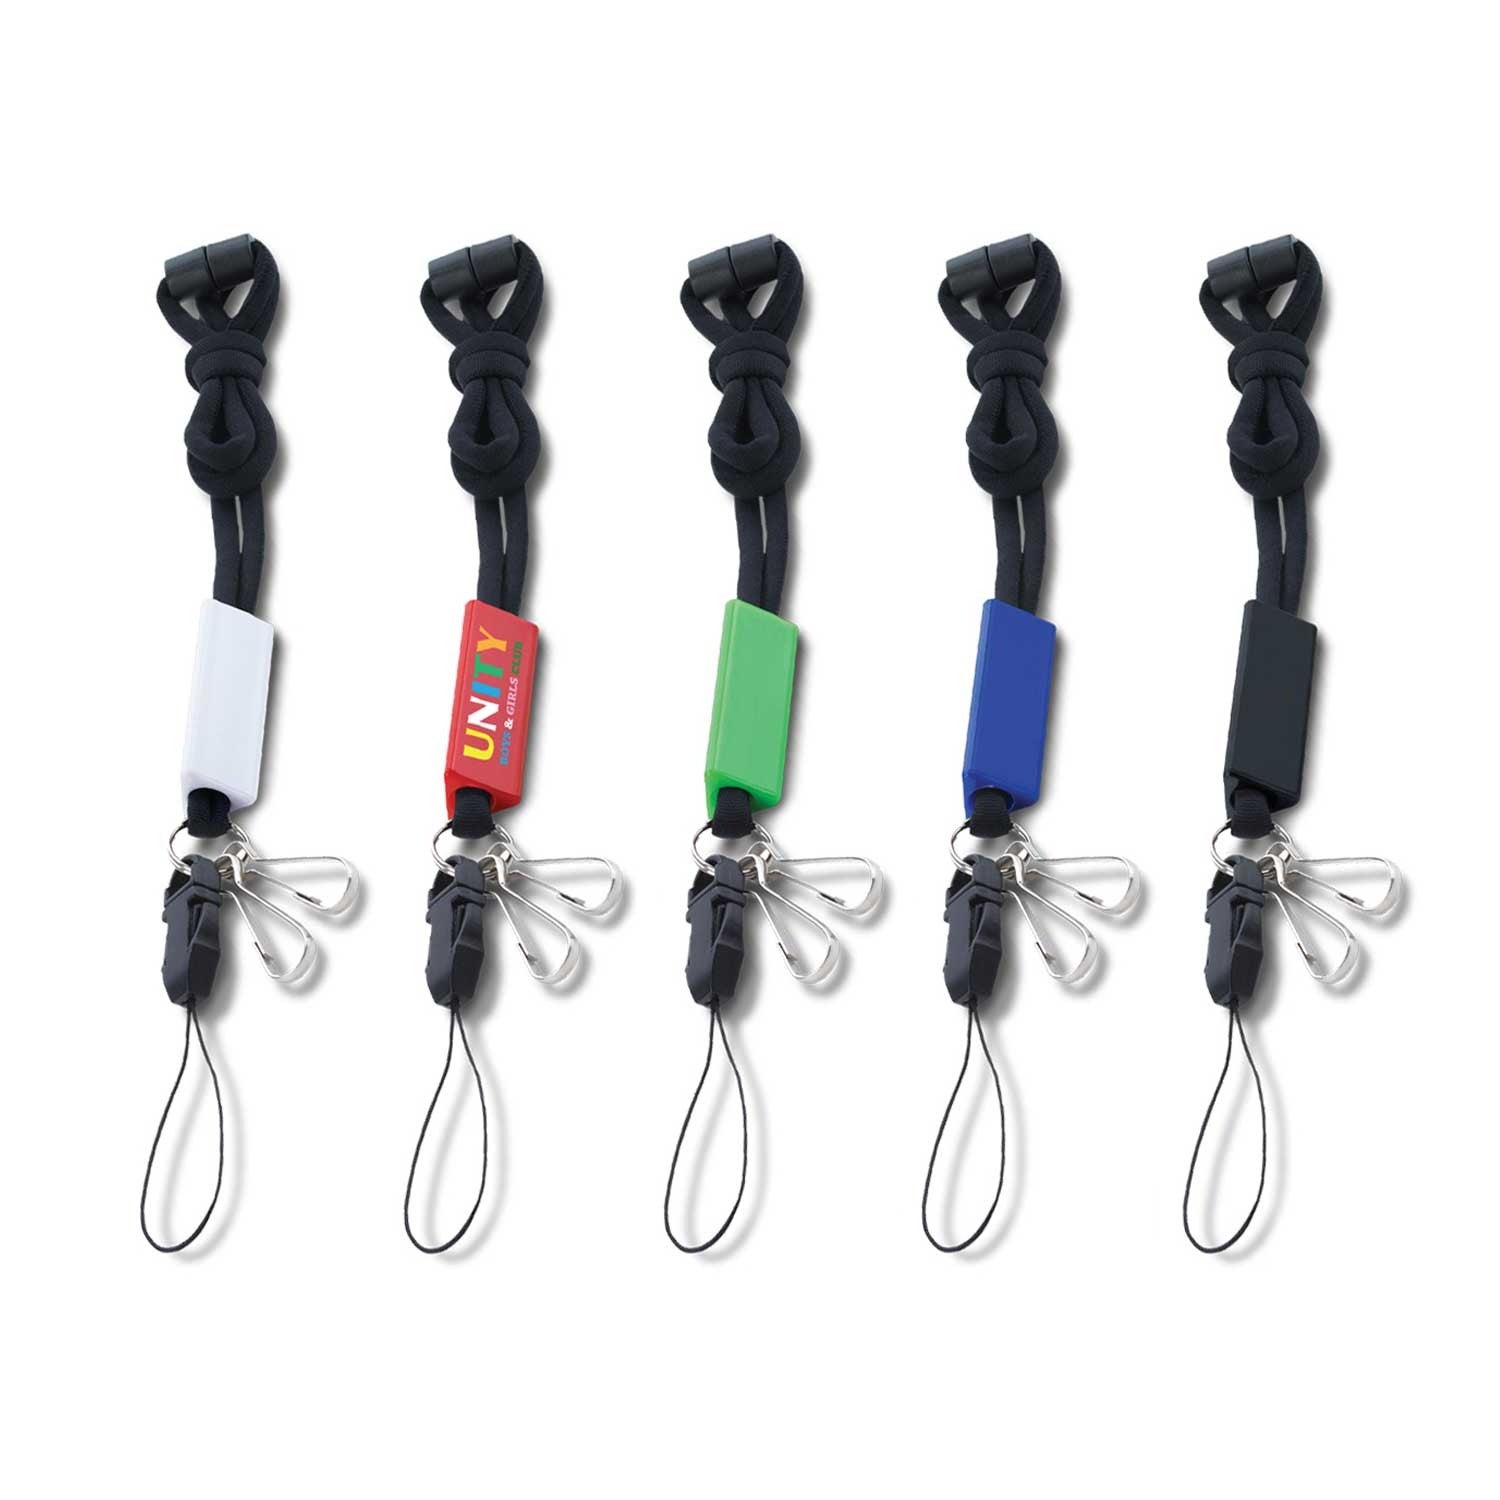 Utility Lanyard With Attachments